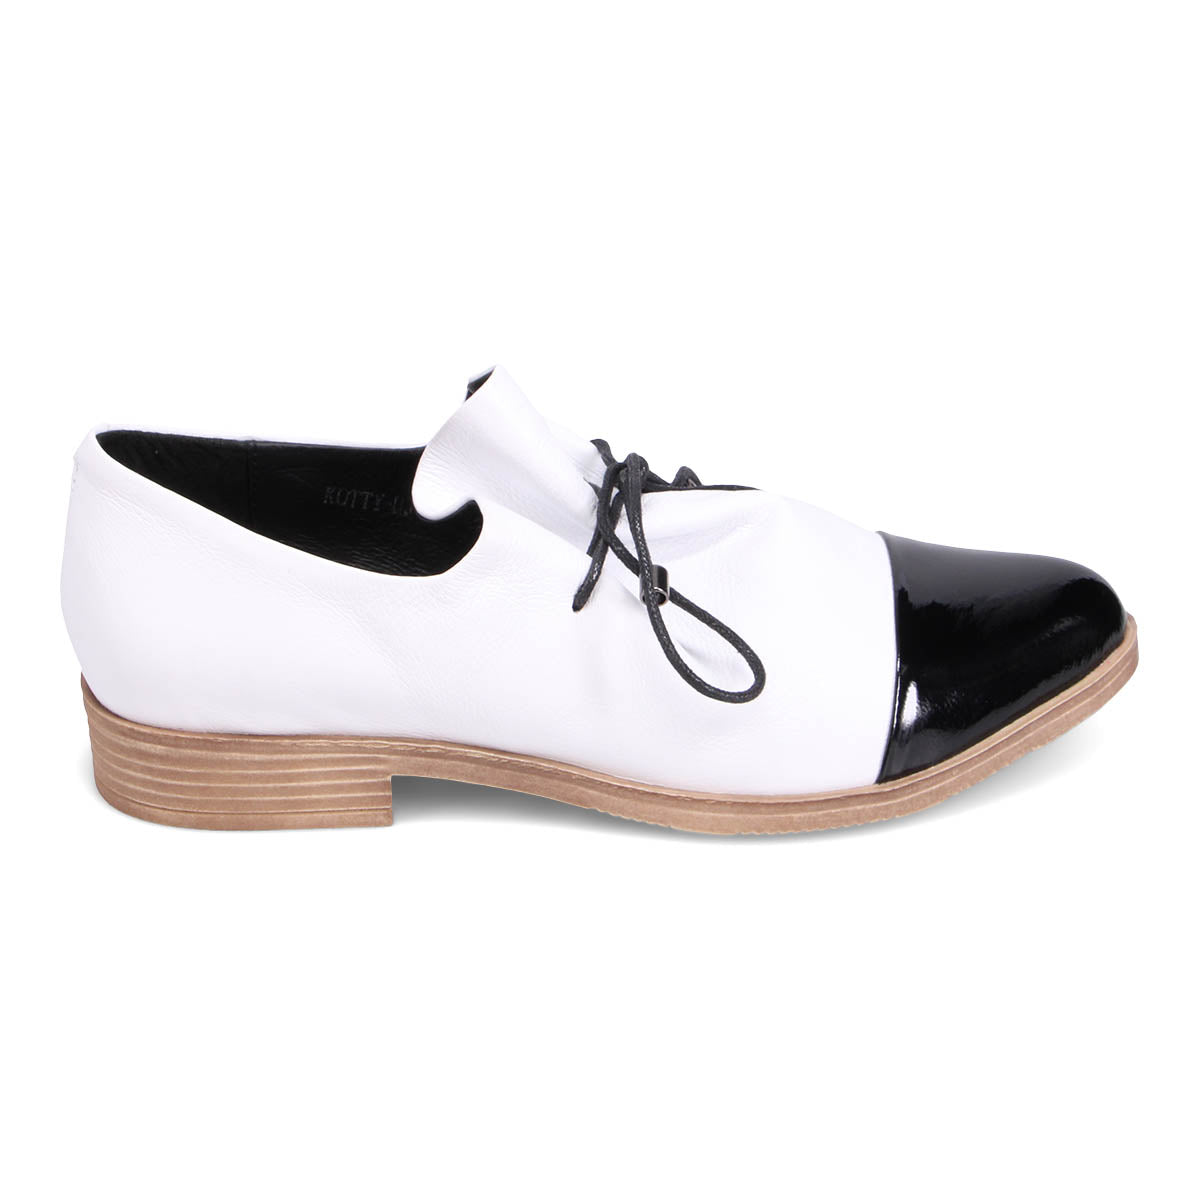 BLACK/WHITE PATENT LEATHER | Right